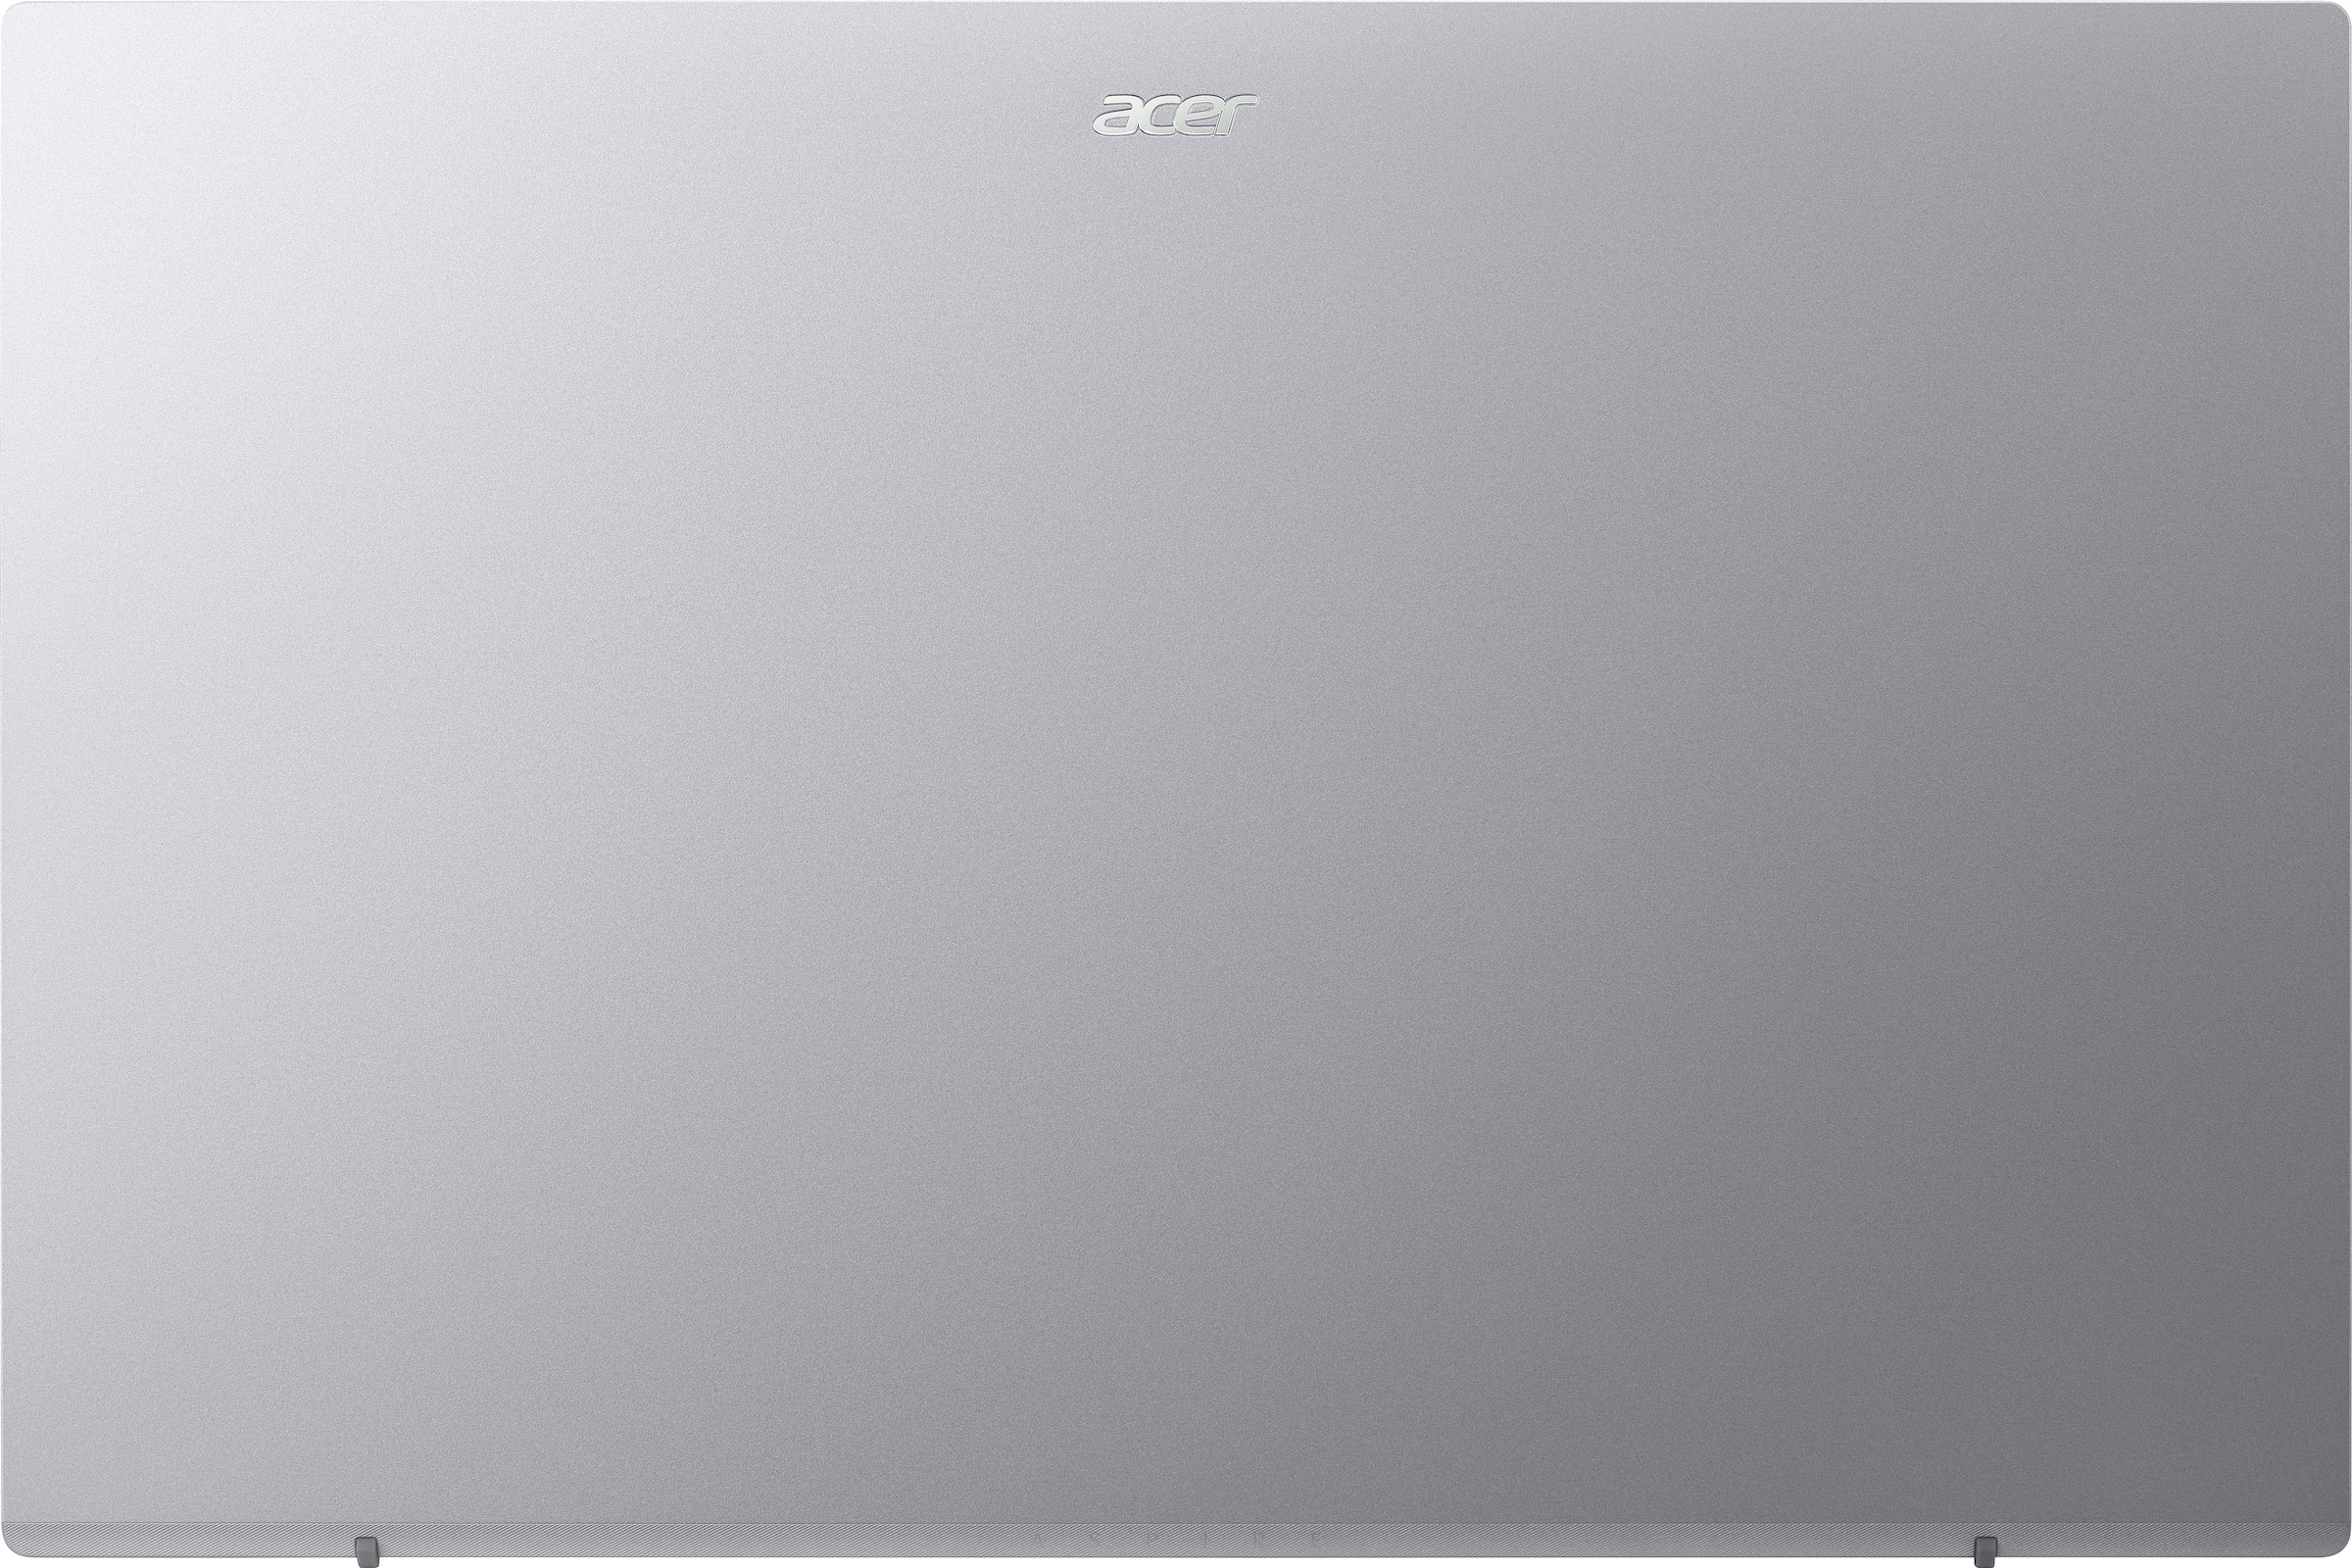 Acer Business-Notebook »Aspire 3 Laptop, Full-HD IPS Display, 8 GB RAM, Windows 11 Home,«, 39,62 cm, / 15,6 Zoll, Intel, Core i3, UHD Graphics, 512 GB SSD, A315-59-37N8